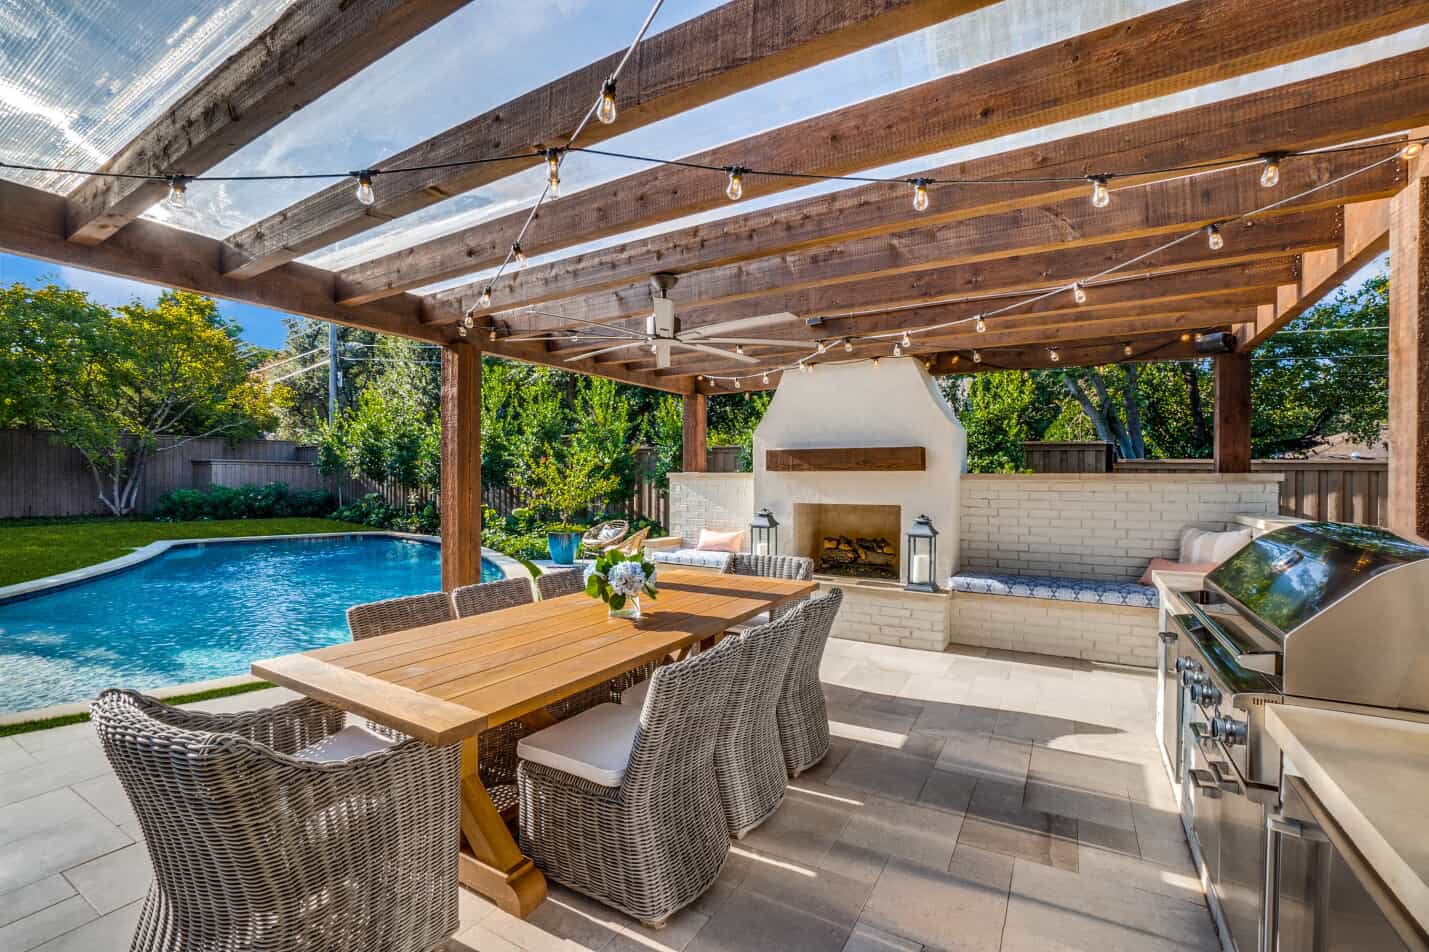 patio with pool and dining set